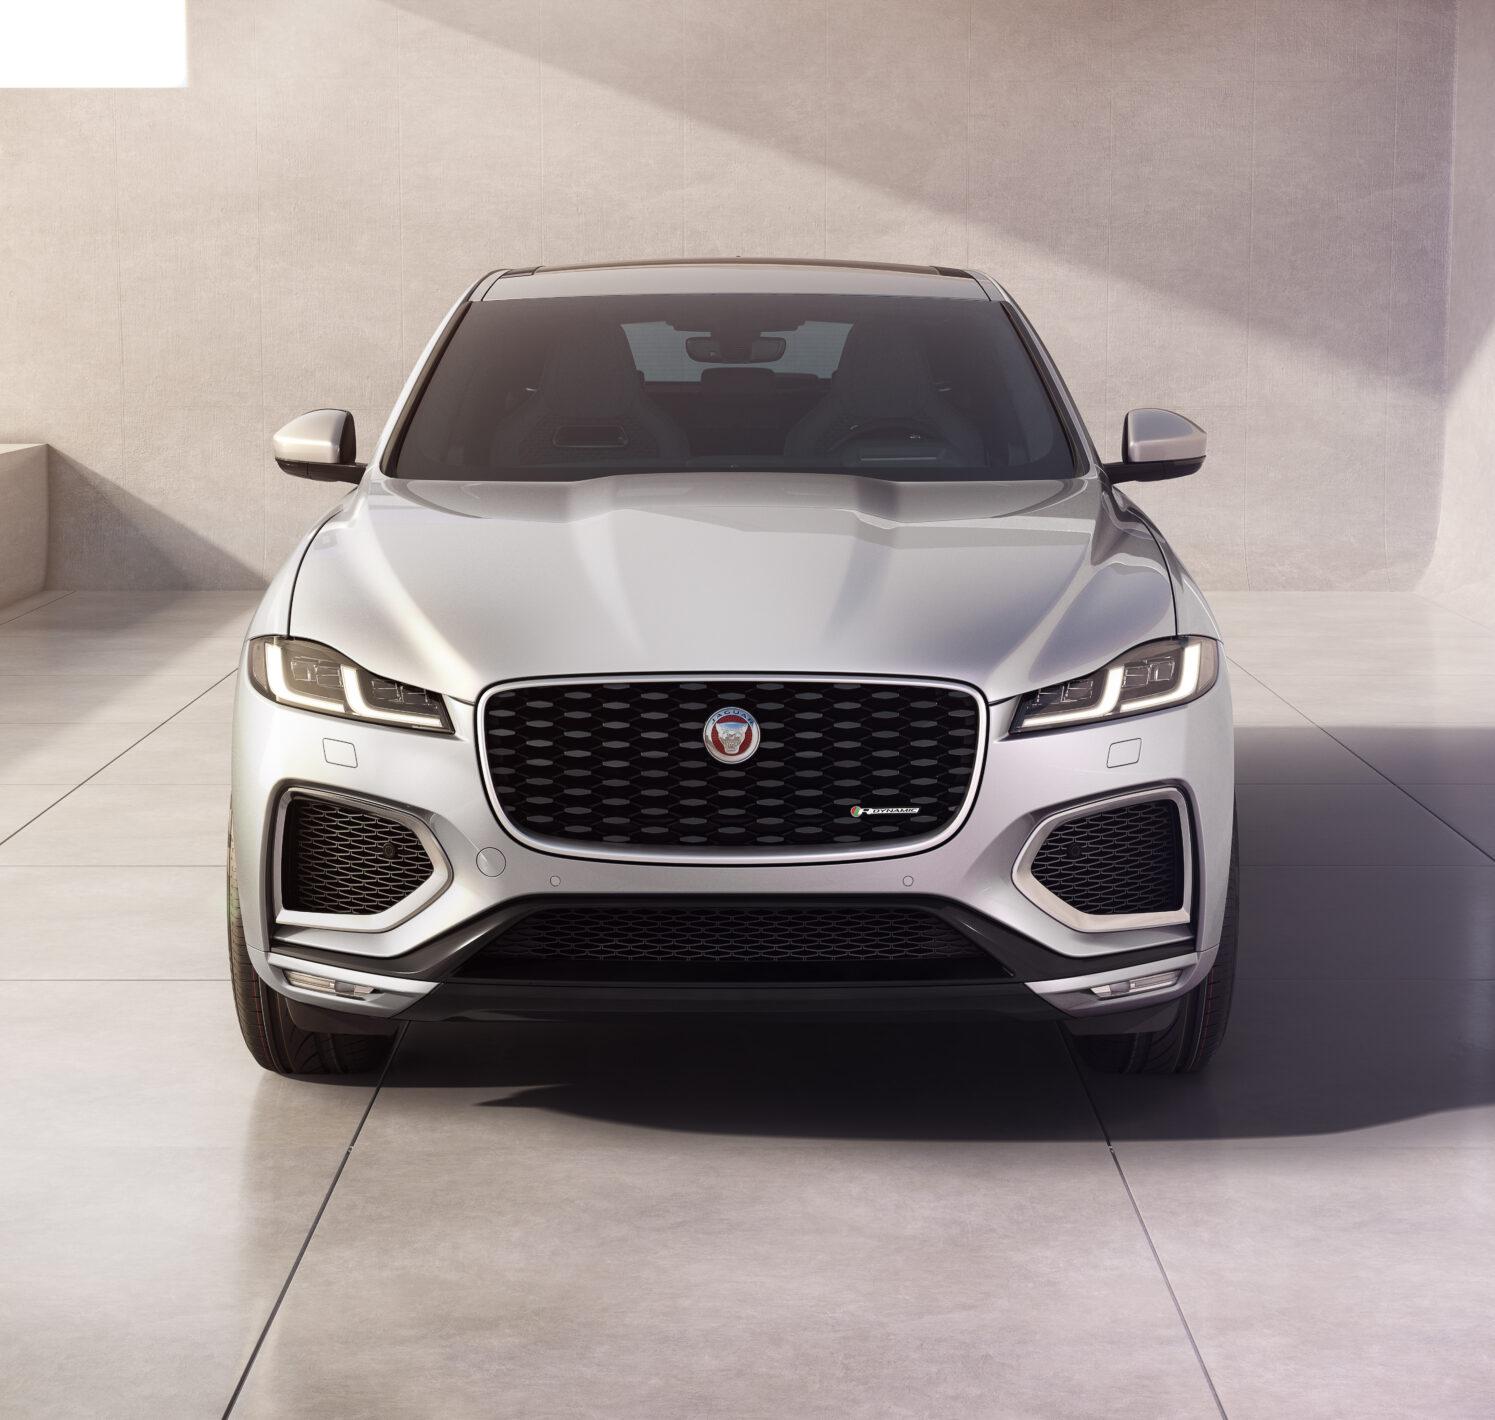 https://autofilter.sk/assets/images/f-pace/gallery/Jag_F-PACE_22MY_01_R-Dynamic_Exterior_Front_110821.jpg - obrazok